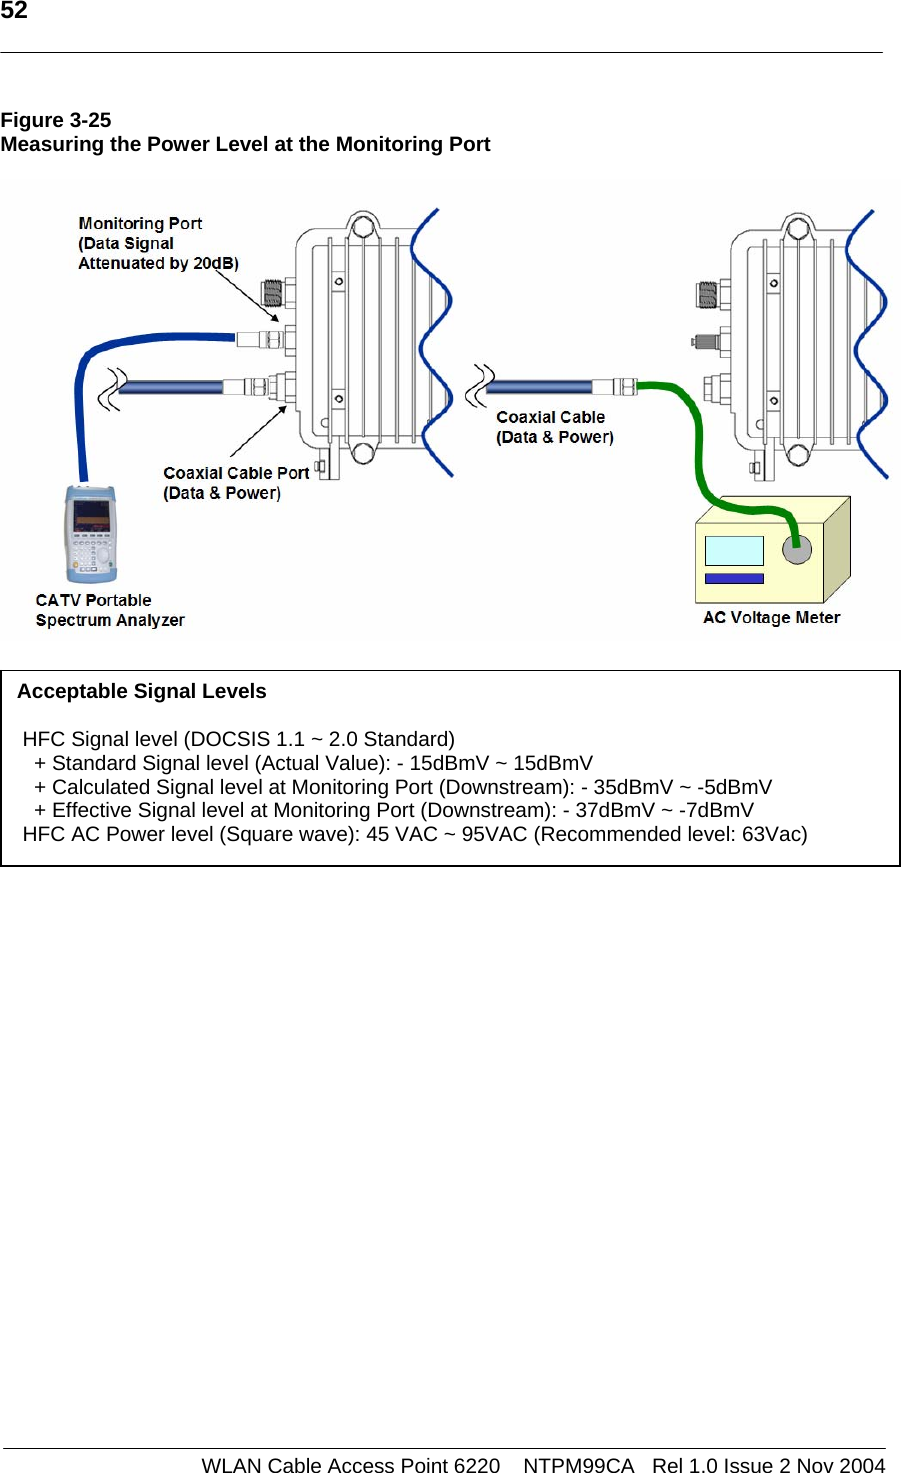   52    WLAN Cable Access Point 6220    NTPM99CA   Rel 1.0 Issue 2 Nov 2004 Figure 3-25 Measuring the Power Level at the Monitoring Port                         Acceptable Signal Levels   HFC Signal level (DOCSIS 1.1 ~ 2.0 Standard)    + Standard Signal level (Actual Value): - 15dBmV ~ 15dBmV    + Calculated Signal level at Monitoring Port (Downstream): - 35dBmV ~ -5dBmV    + Effective Signal level at Monitoring Port (Downstream): - 37dBmV ~ -7dBmV  HFC AC Power level (Square wave): 45 VAC ~ 95VAC (Recommended level: 63Vac) 